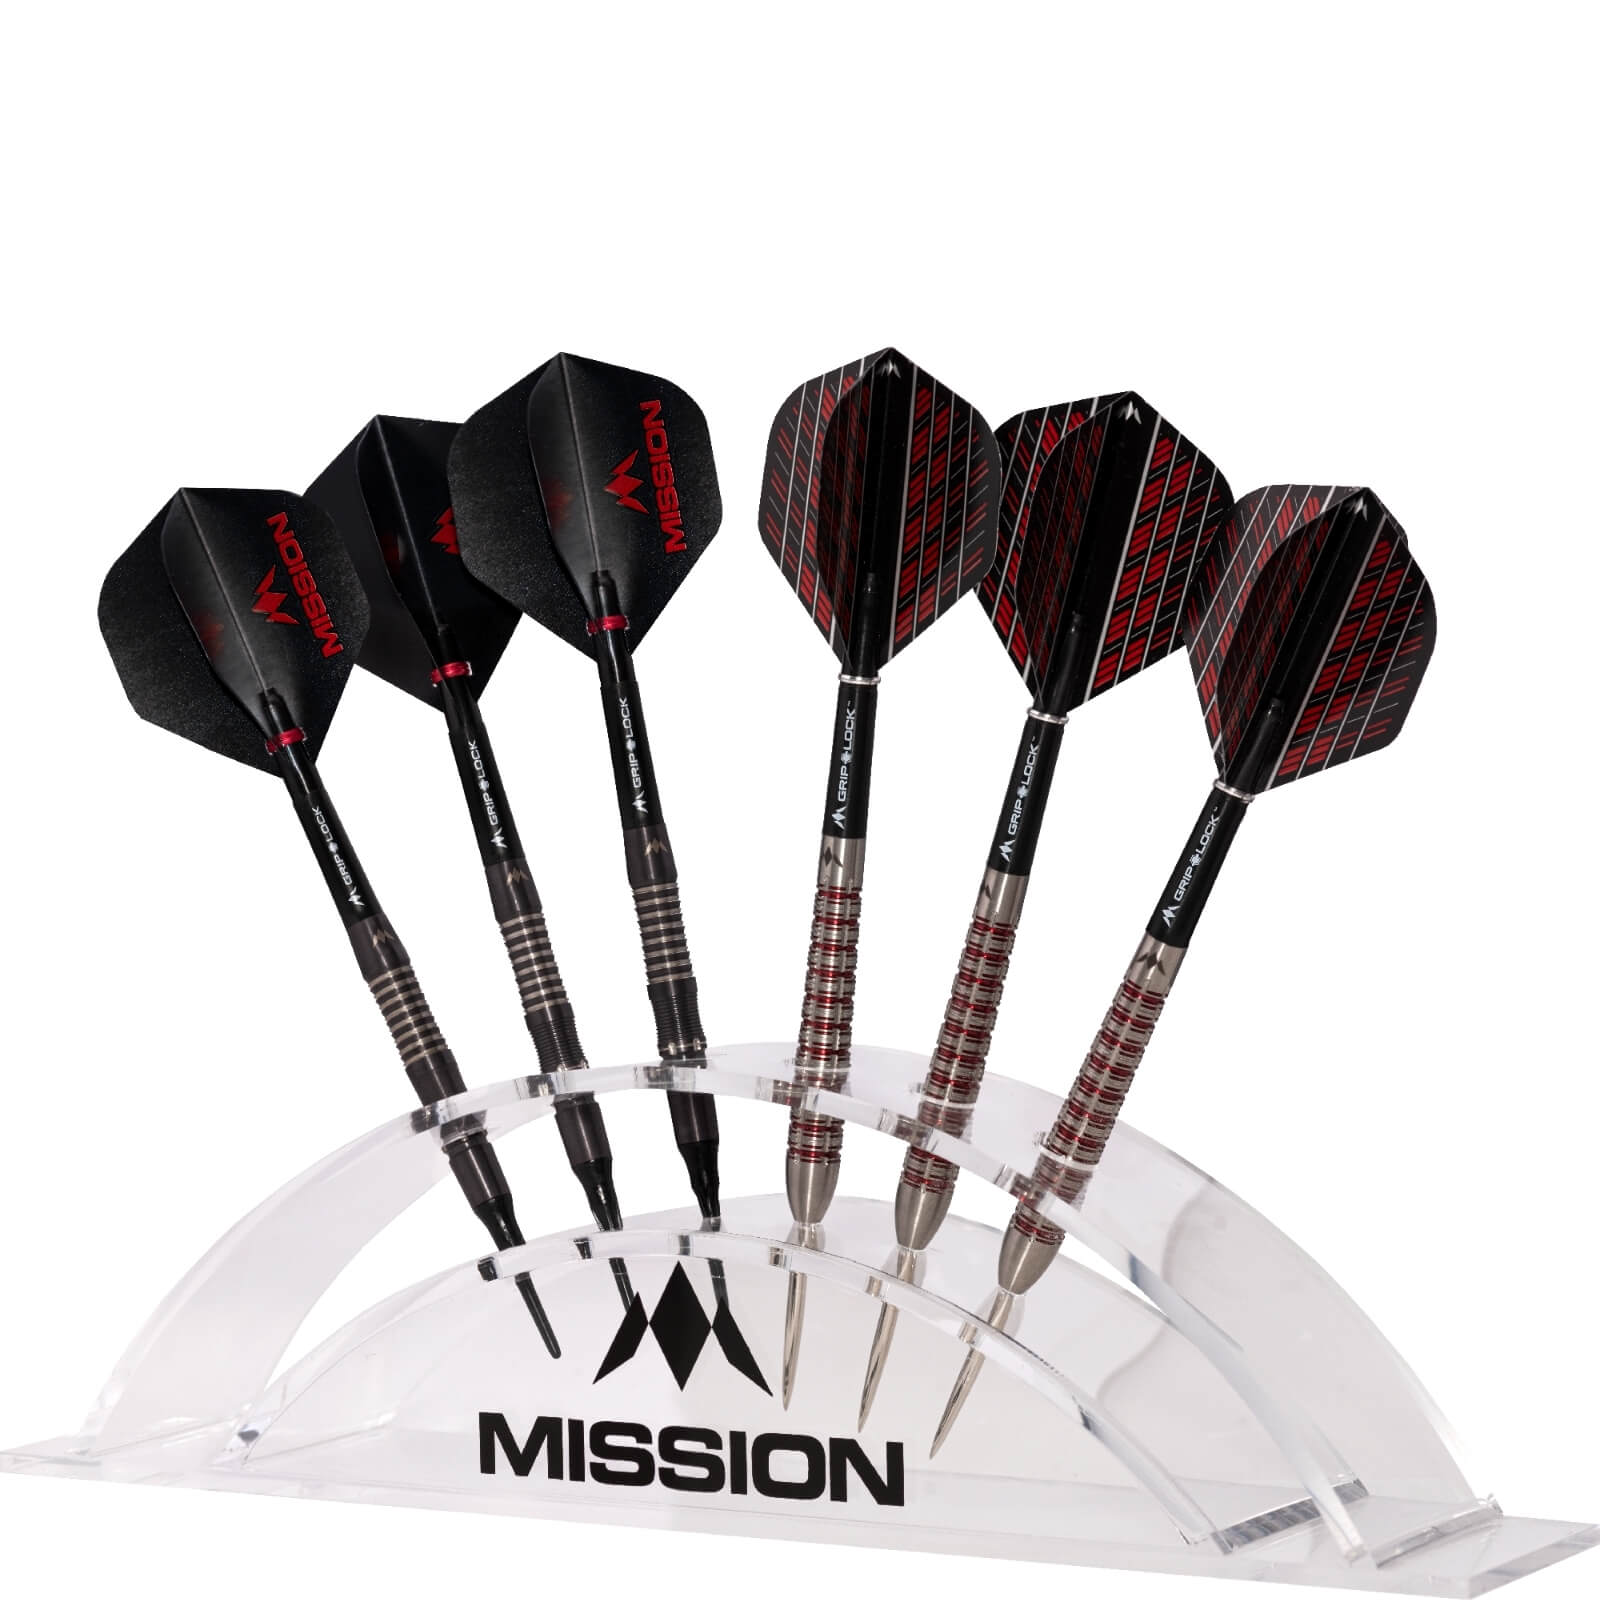 Display Stands - Mission - Station 6 - Acrylic Darts Display Arc 